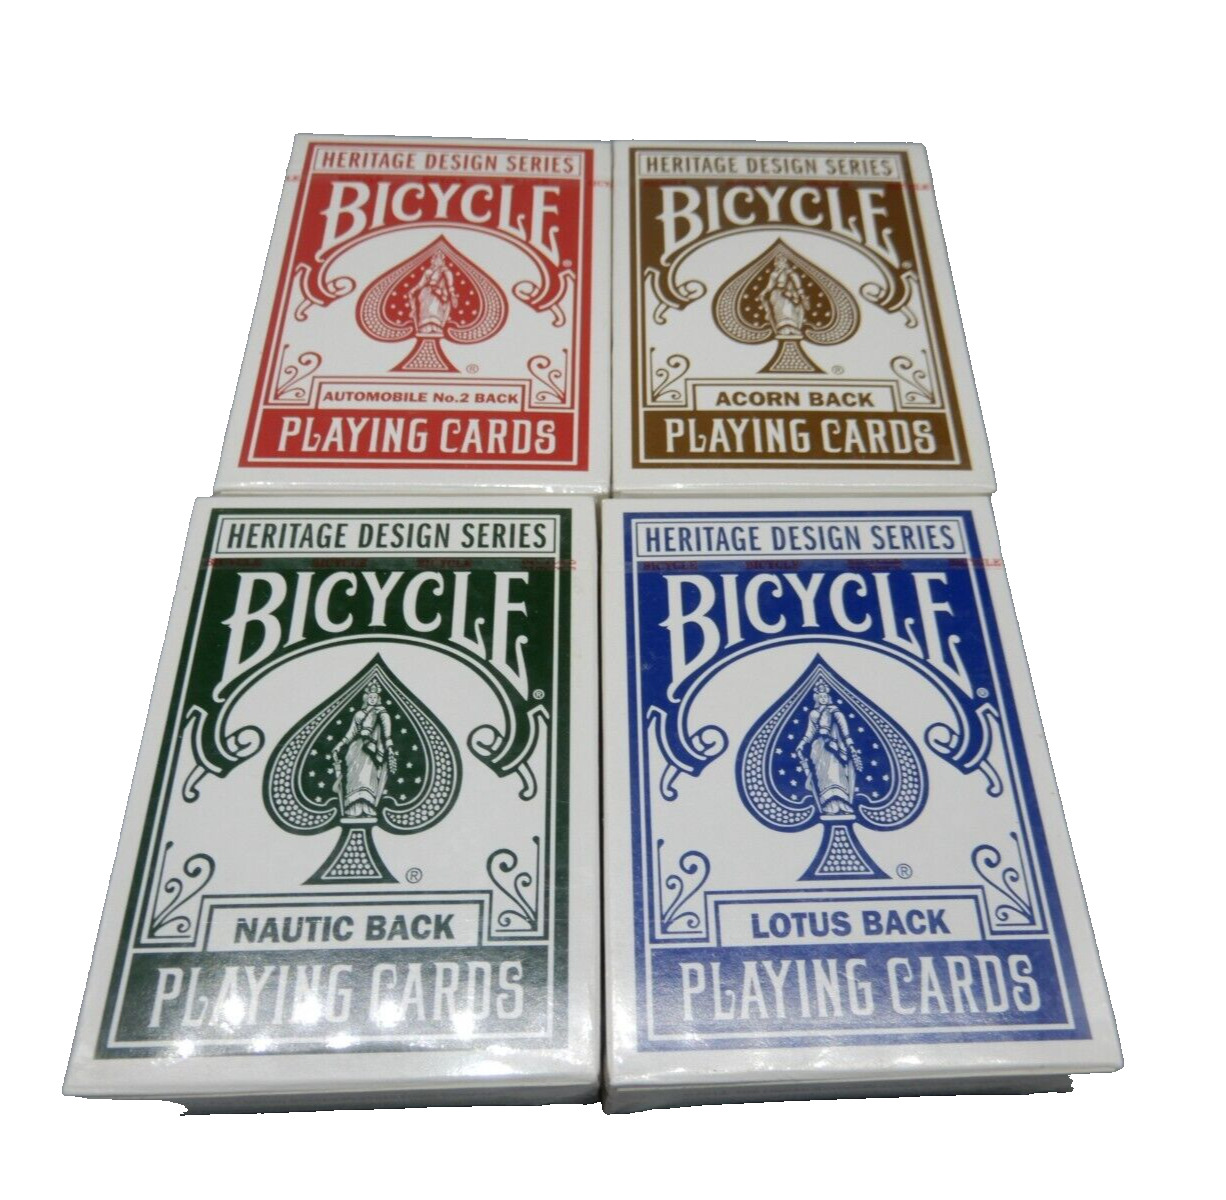 4 Bicycle HERITAGE DESIGN SERIES Playing Card deck NEW/SEALED Acorn, Lotus, Auto